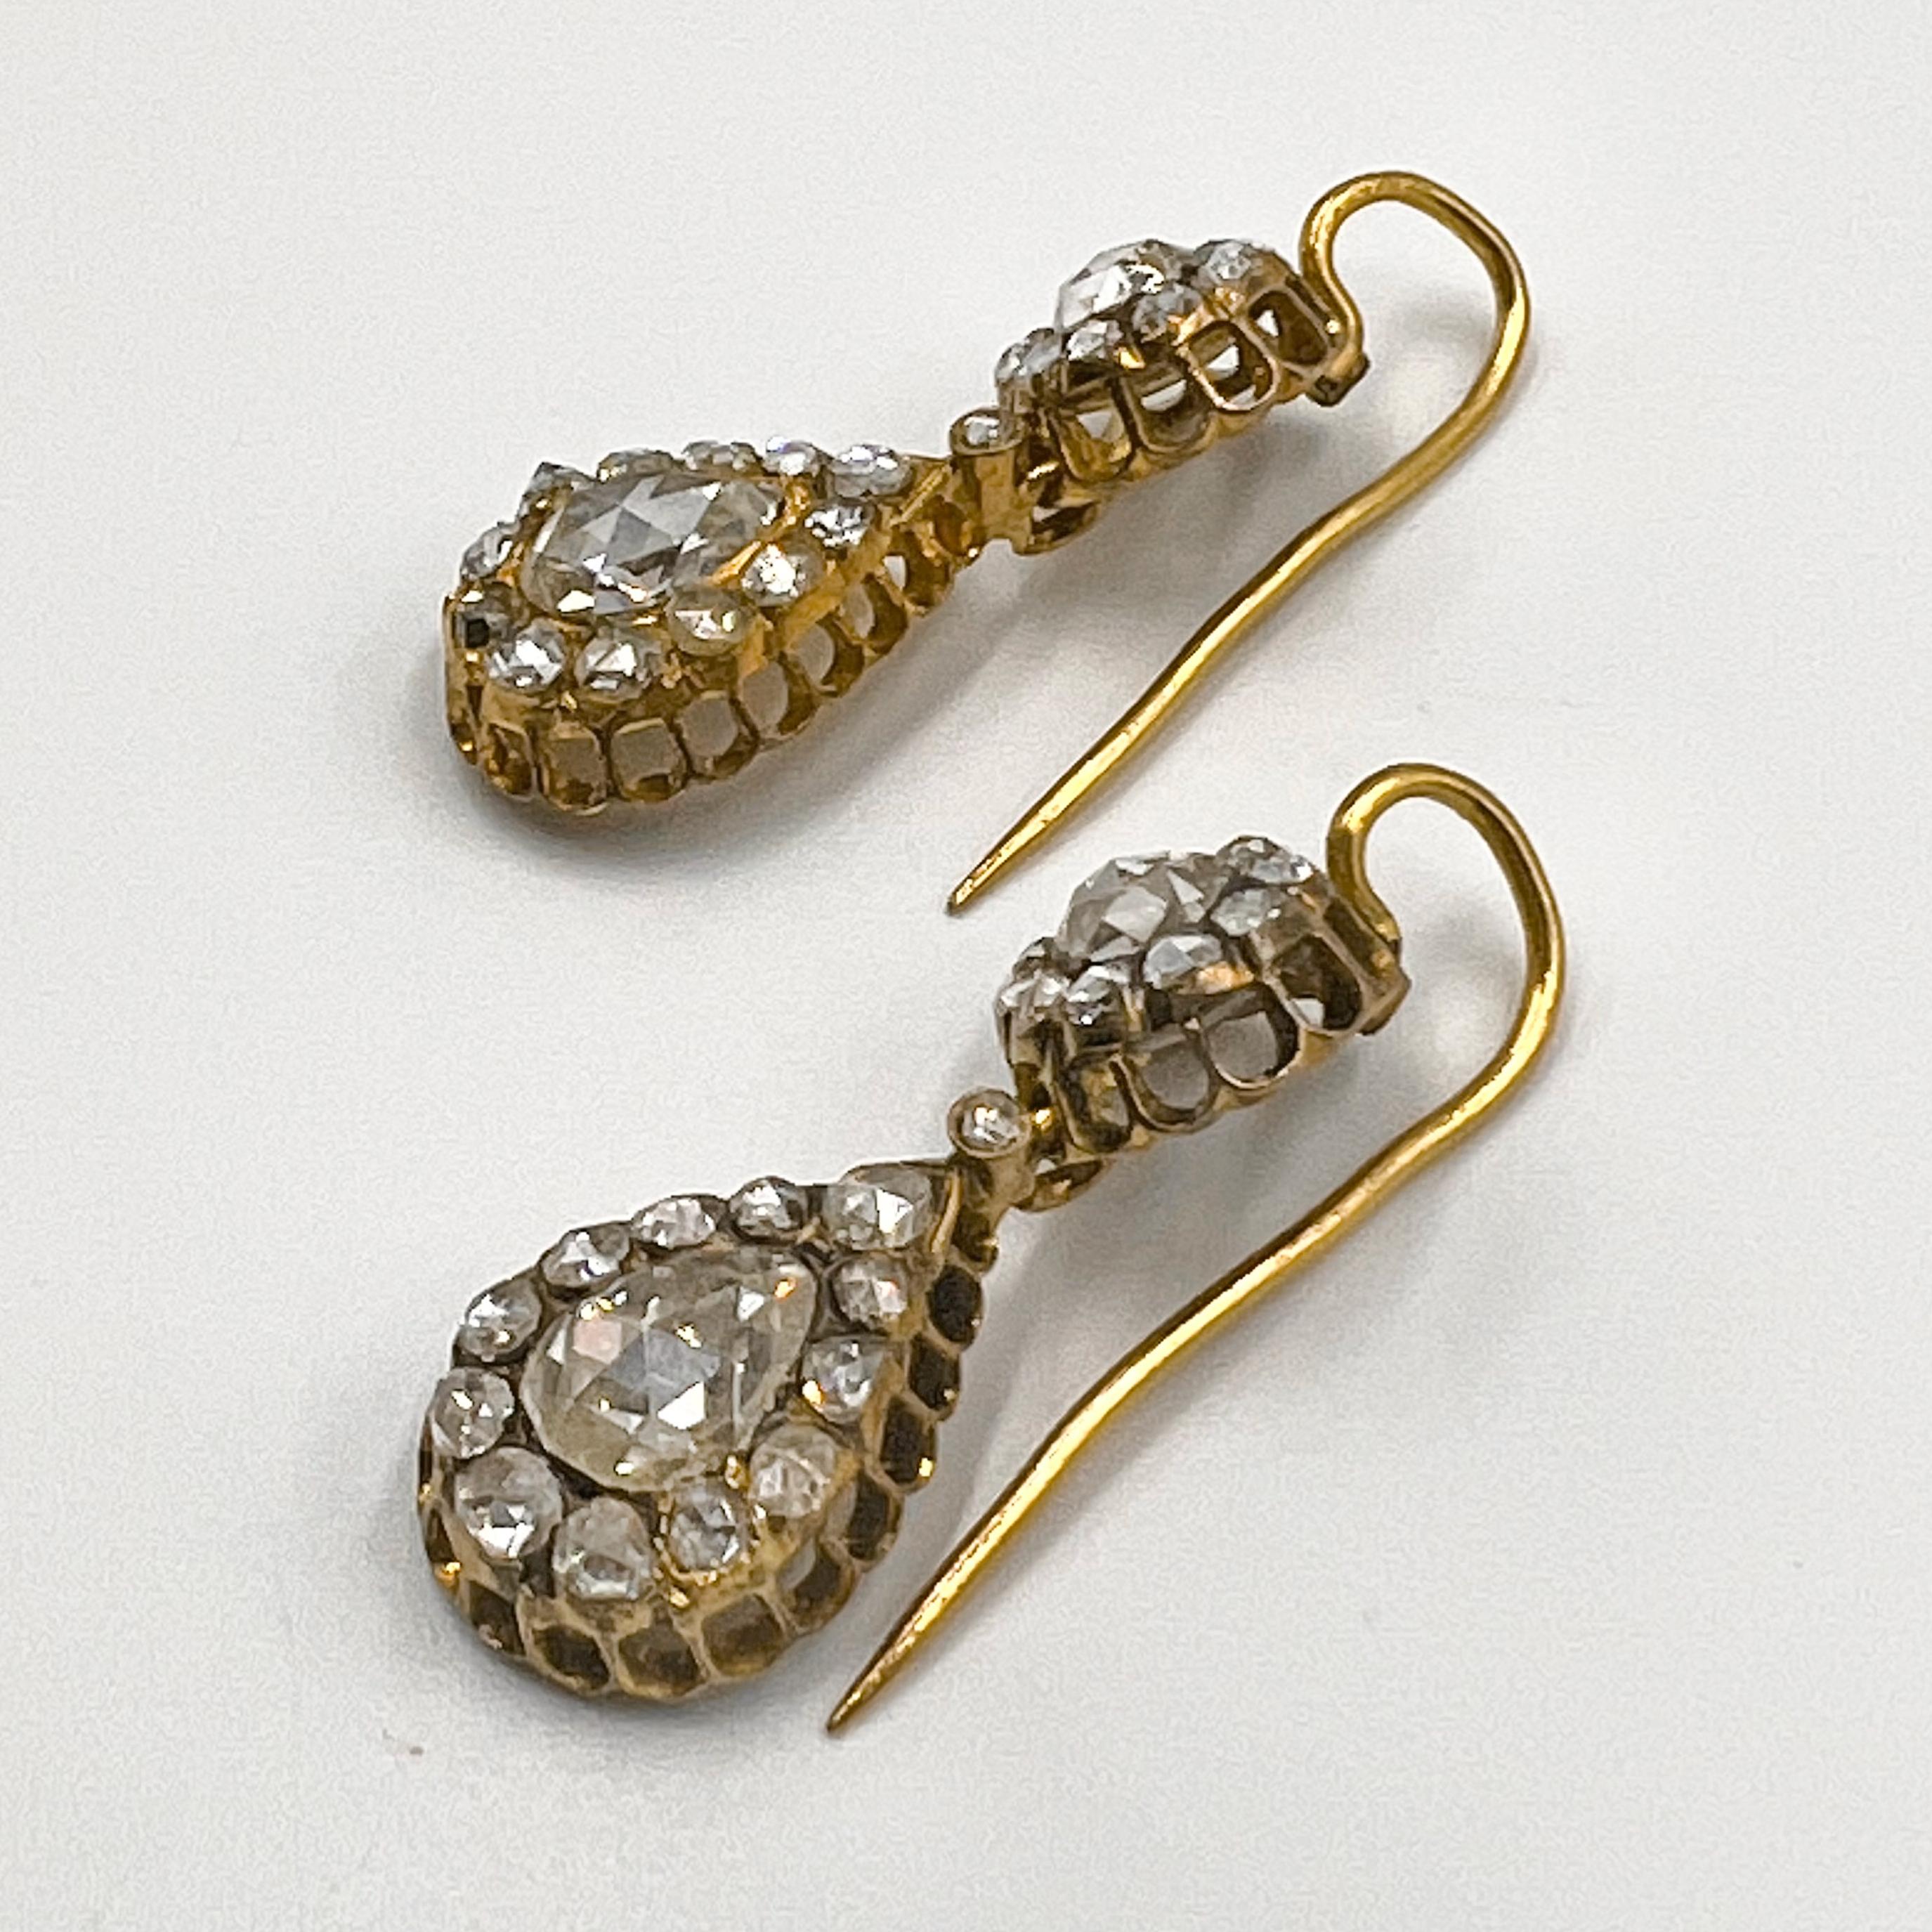 Antique double-drop diamond cluster earrings, featuring cushion, round and pear-shaped rose-cut diamonds weighing approximately 6.00 total carats.  Solid gold backing.  Gold pierced wires.  Measuring 1.5